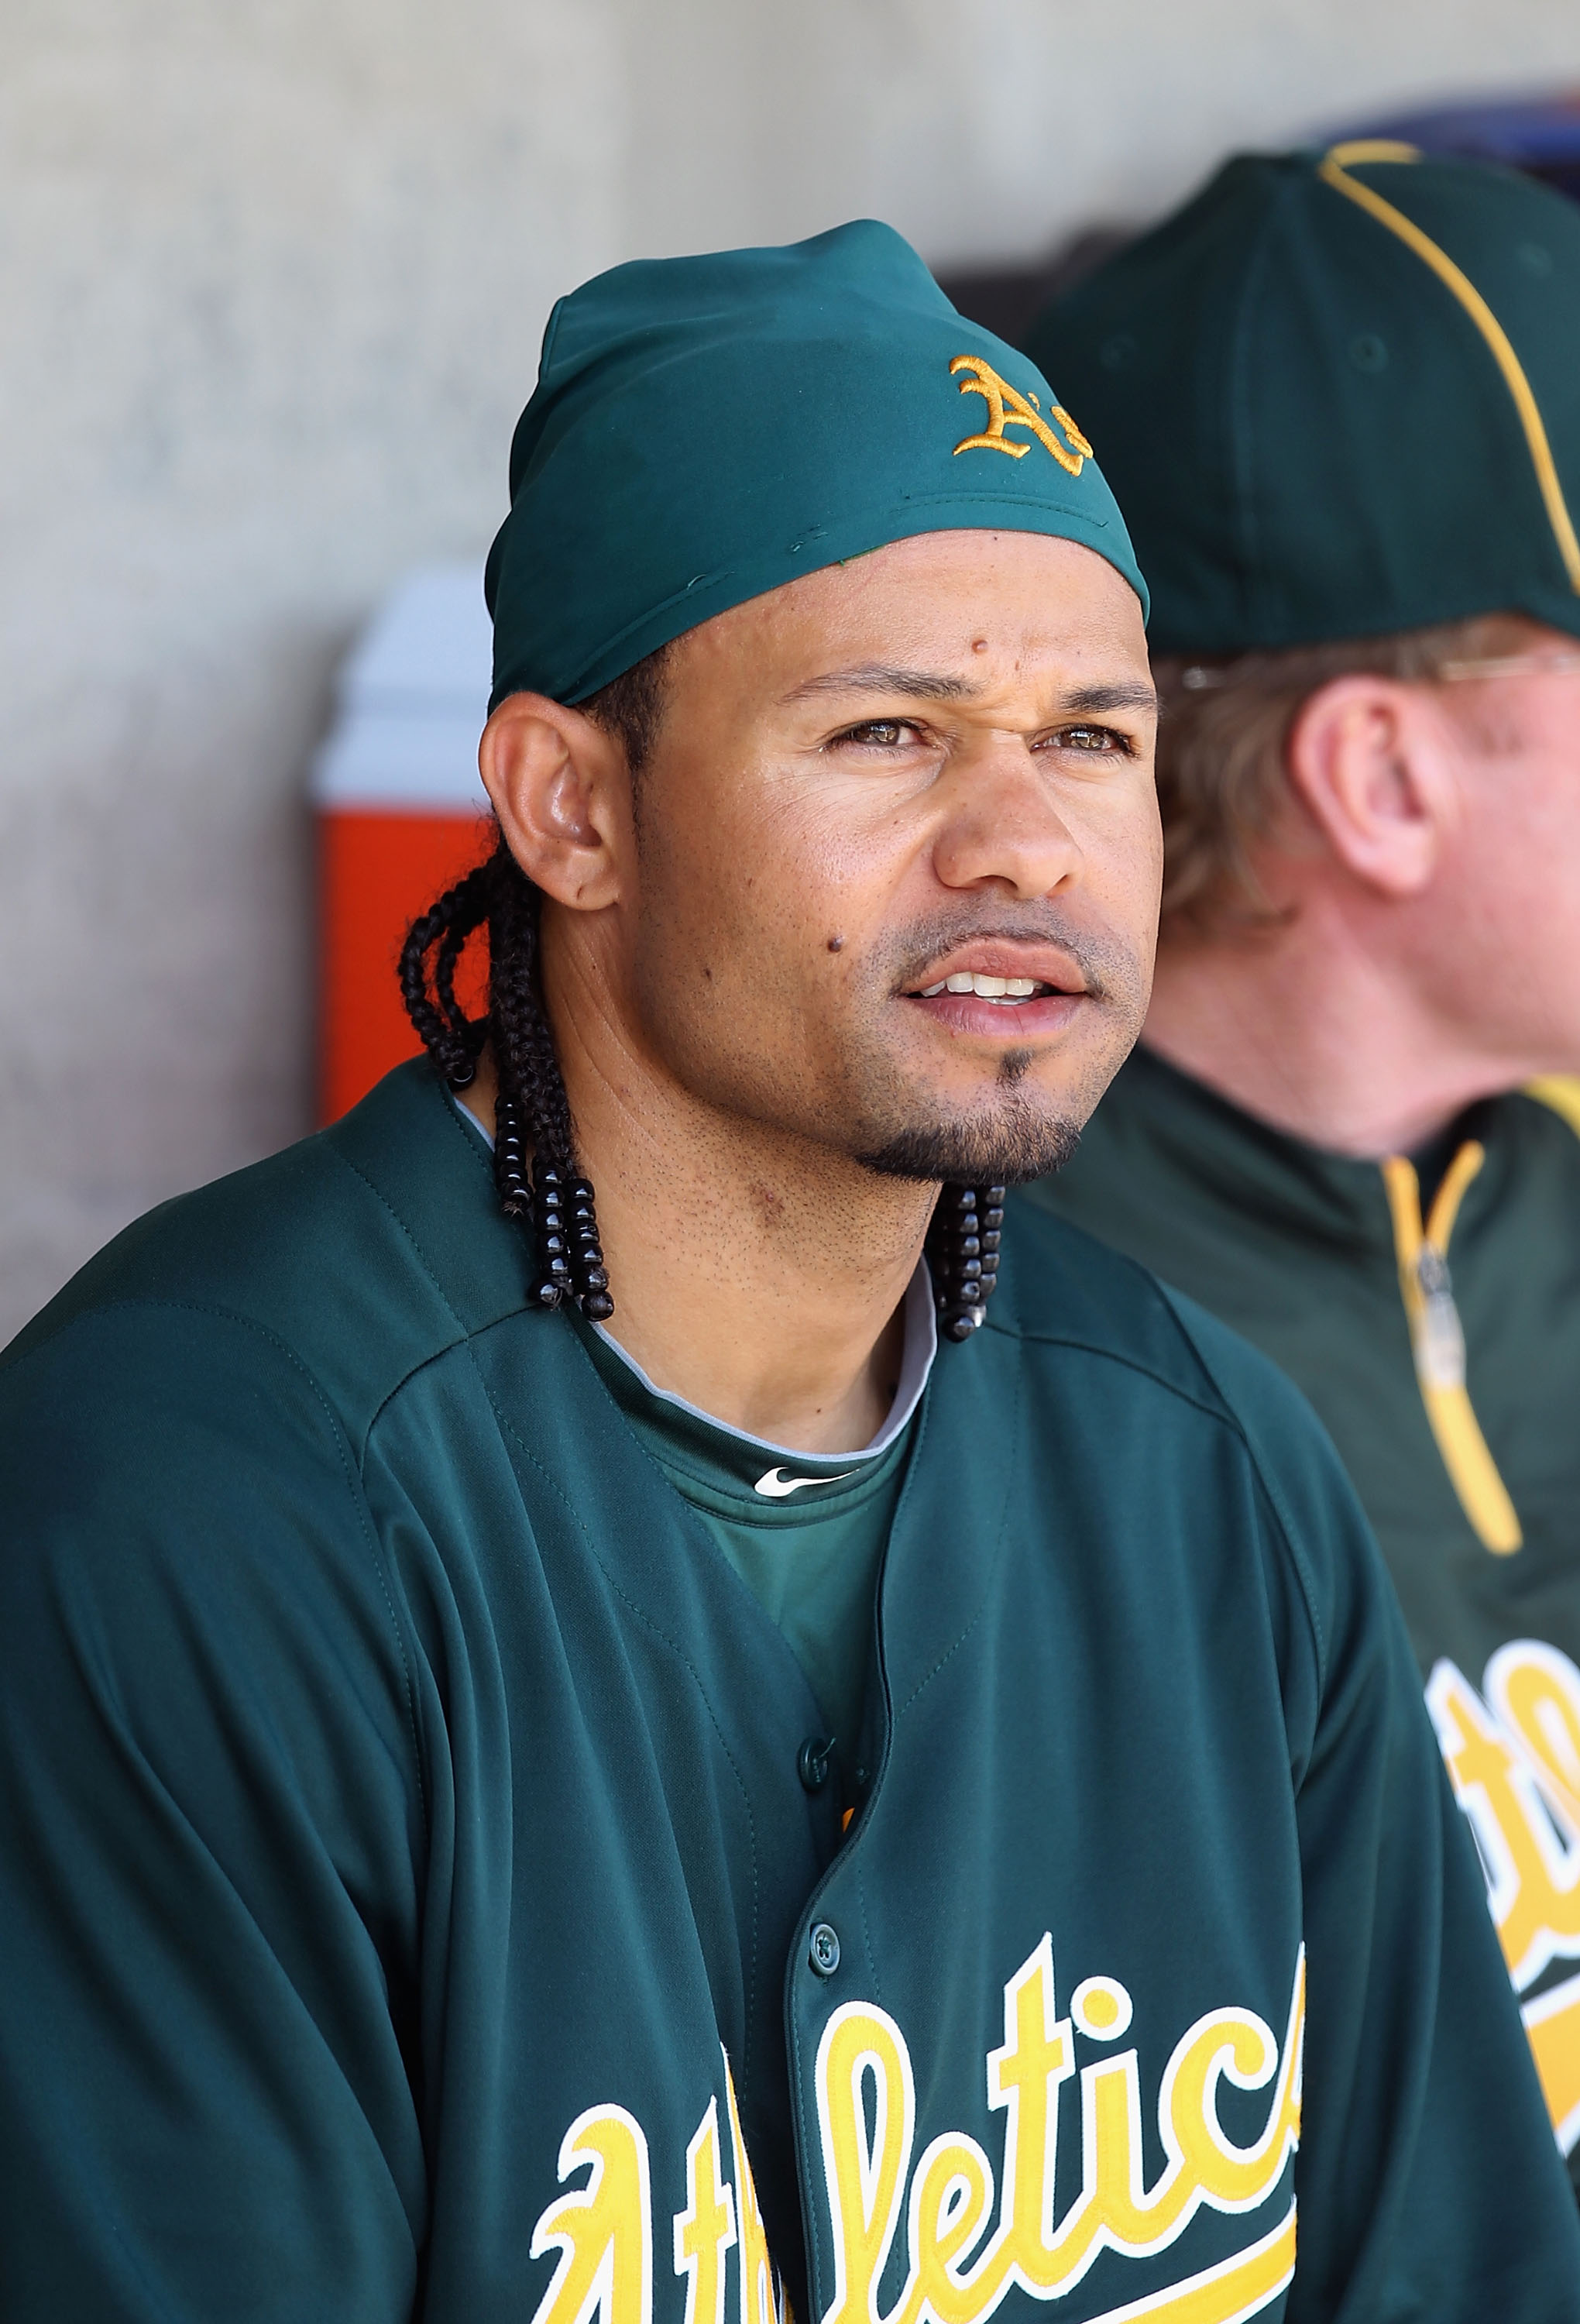 PHOENIX, AZ - MARCH 03:  Coco Crisp #4 of the Oakland Athletics sits in the dugout before the spring training game against the Milwaukee Brewers at Maryvale Baseball Park on March 3, 2011 in Phoenix, Arizona.  (Photo by Christian Petersen/Getty Images)